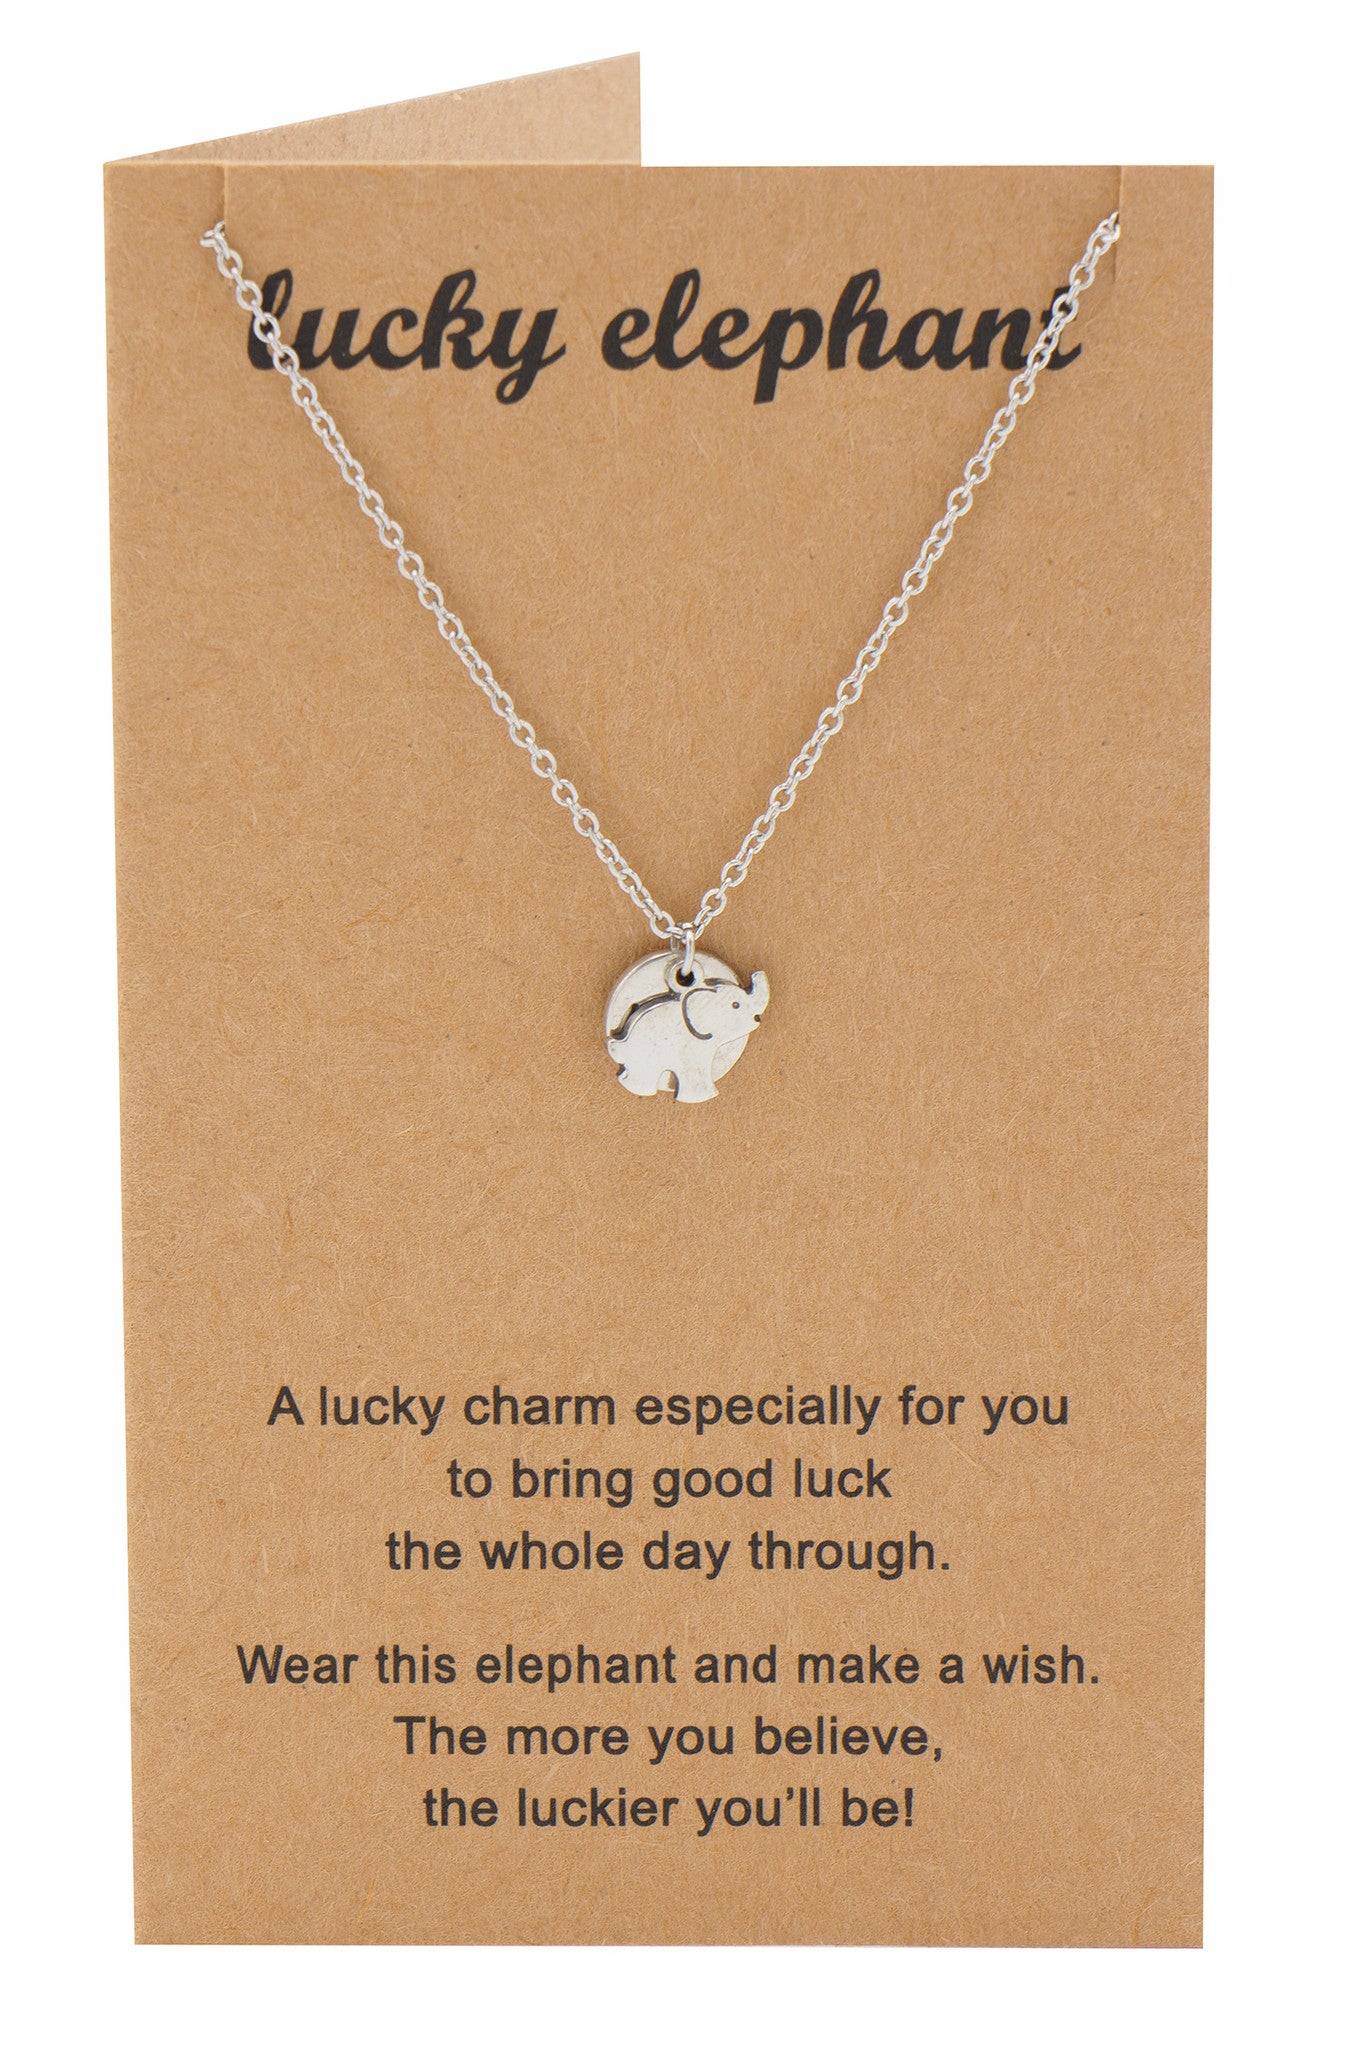 Misty Elephant Necklace with Good Luck Charm and Greeting Card